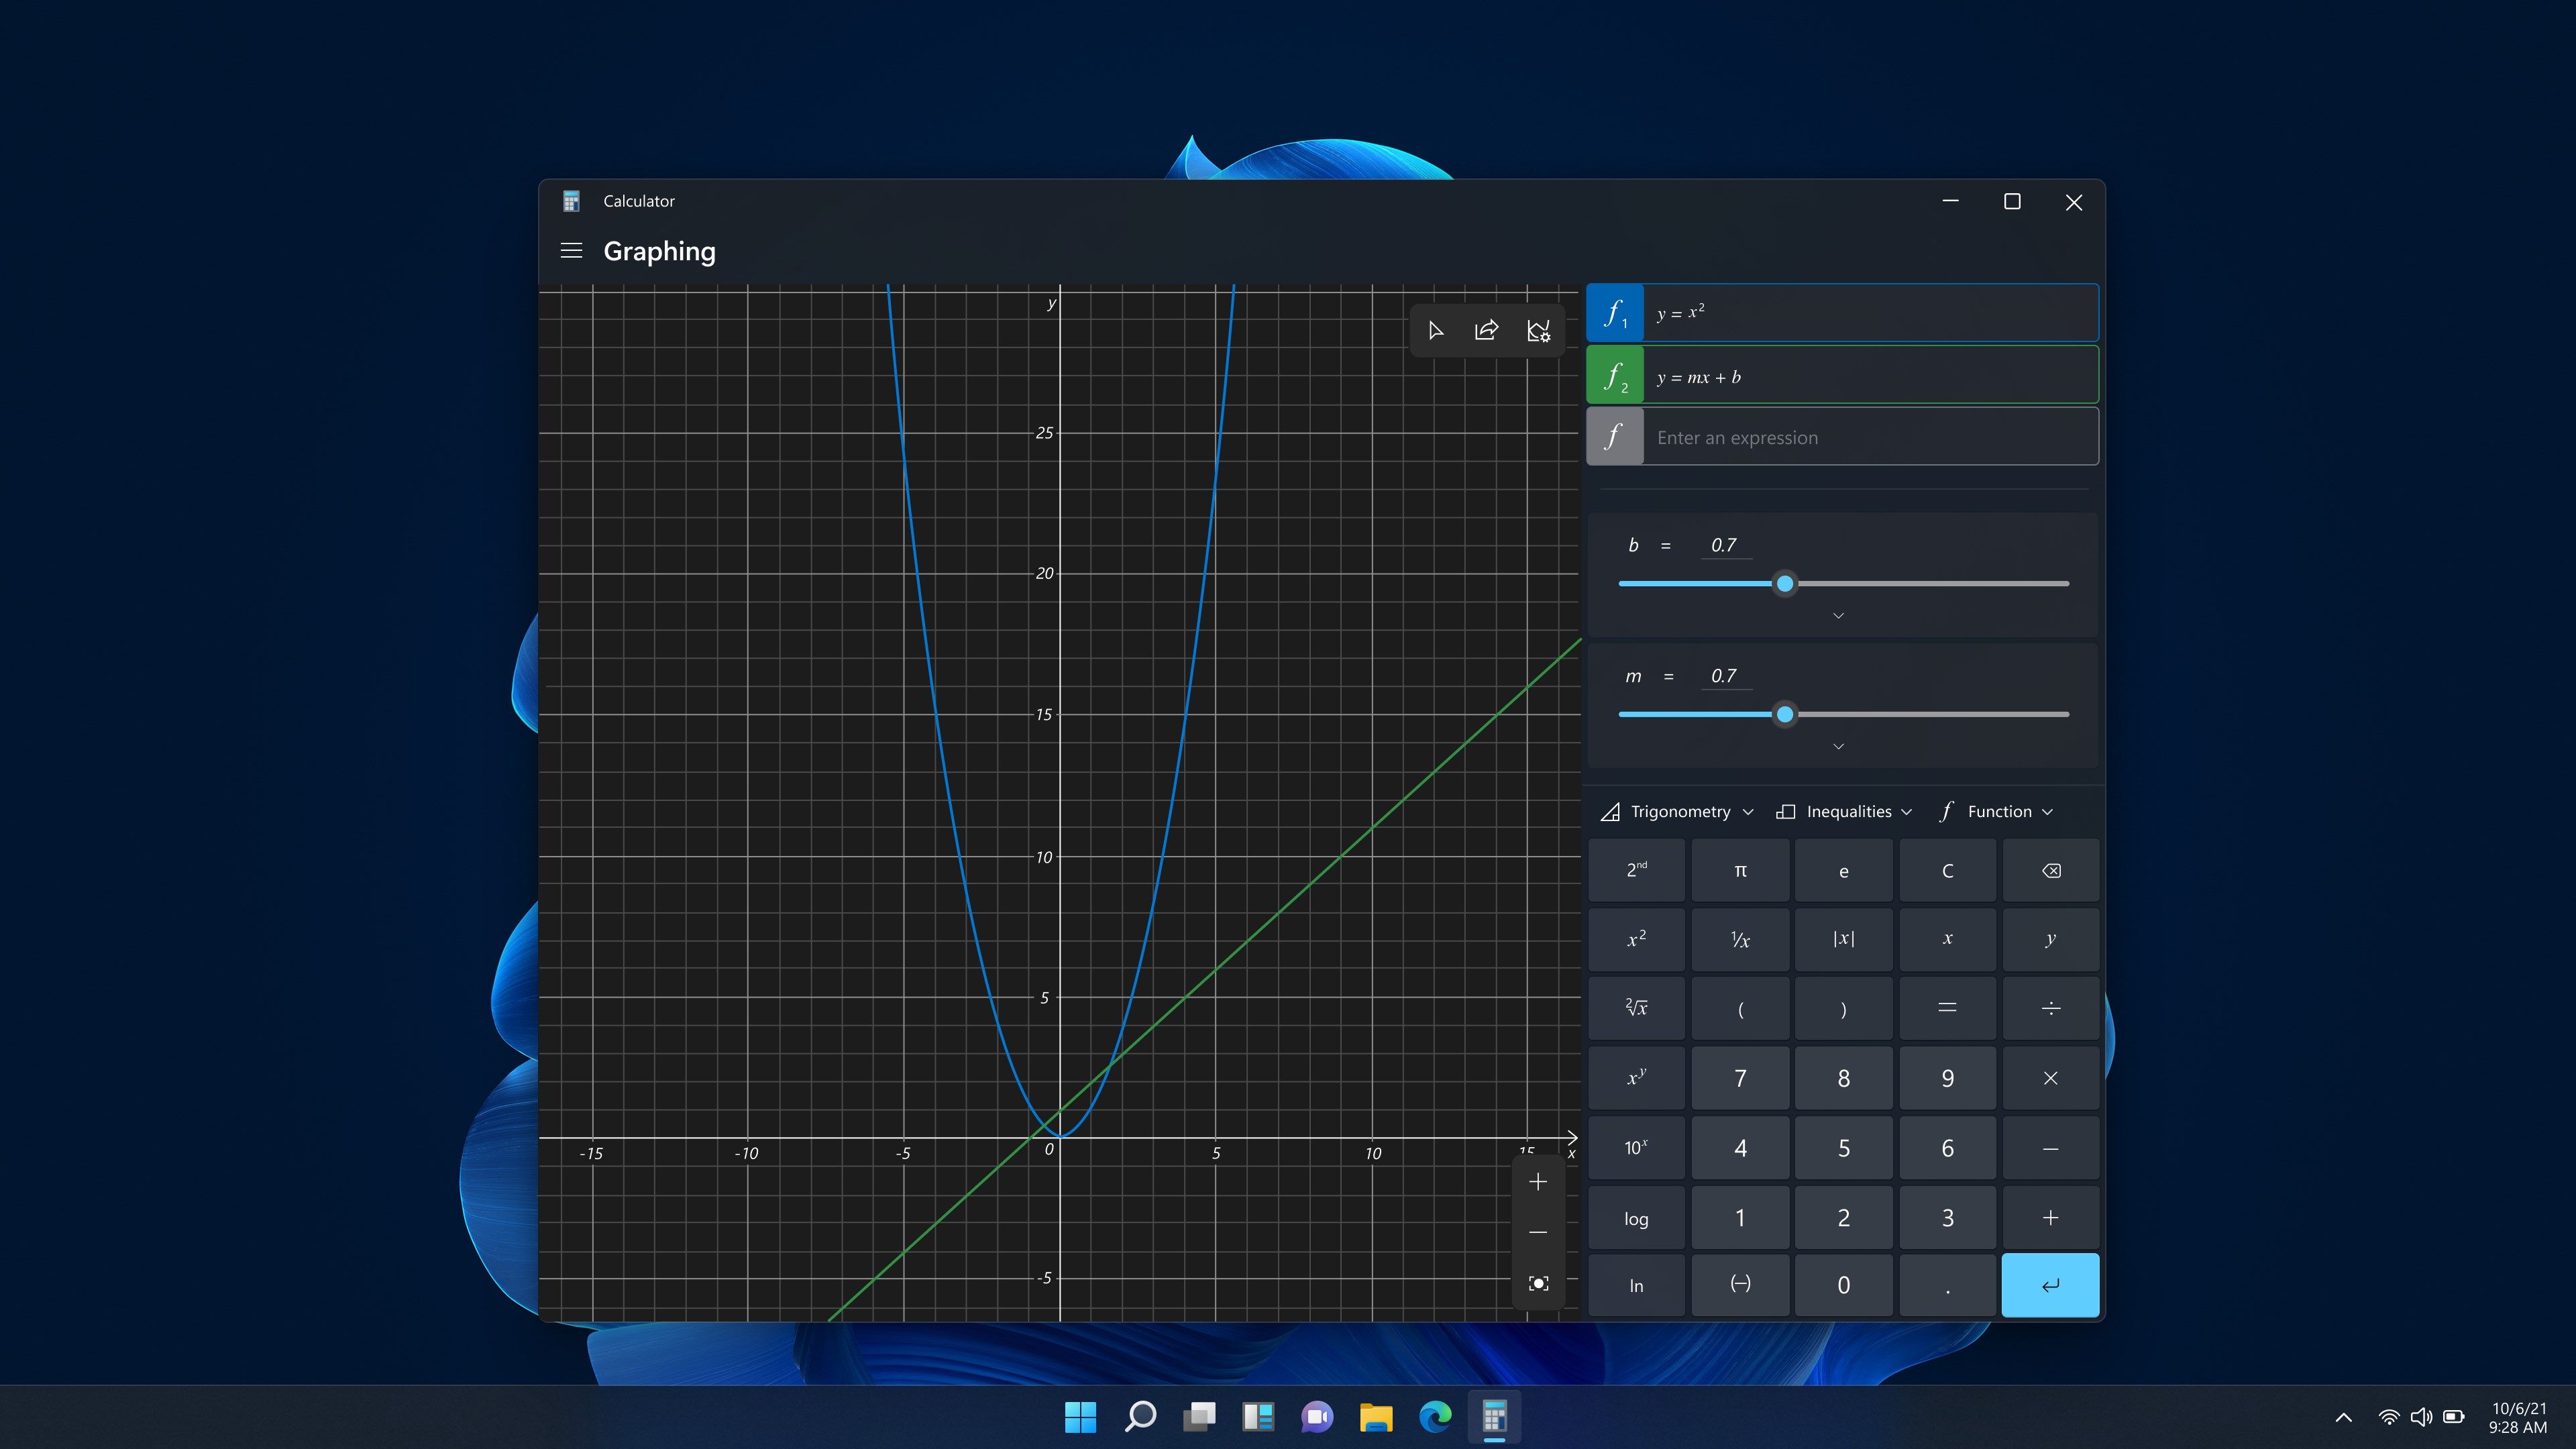 Intuitive and powerful graphing mode to visualize math equations.